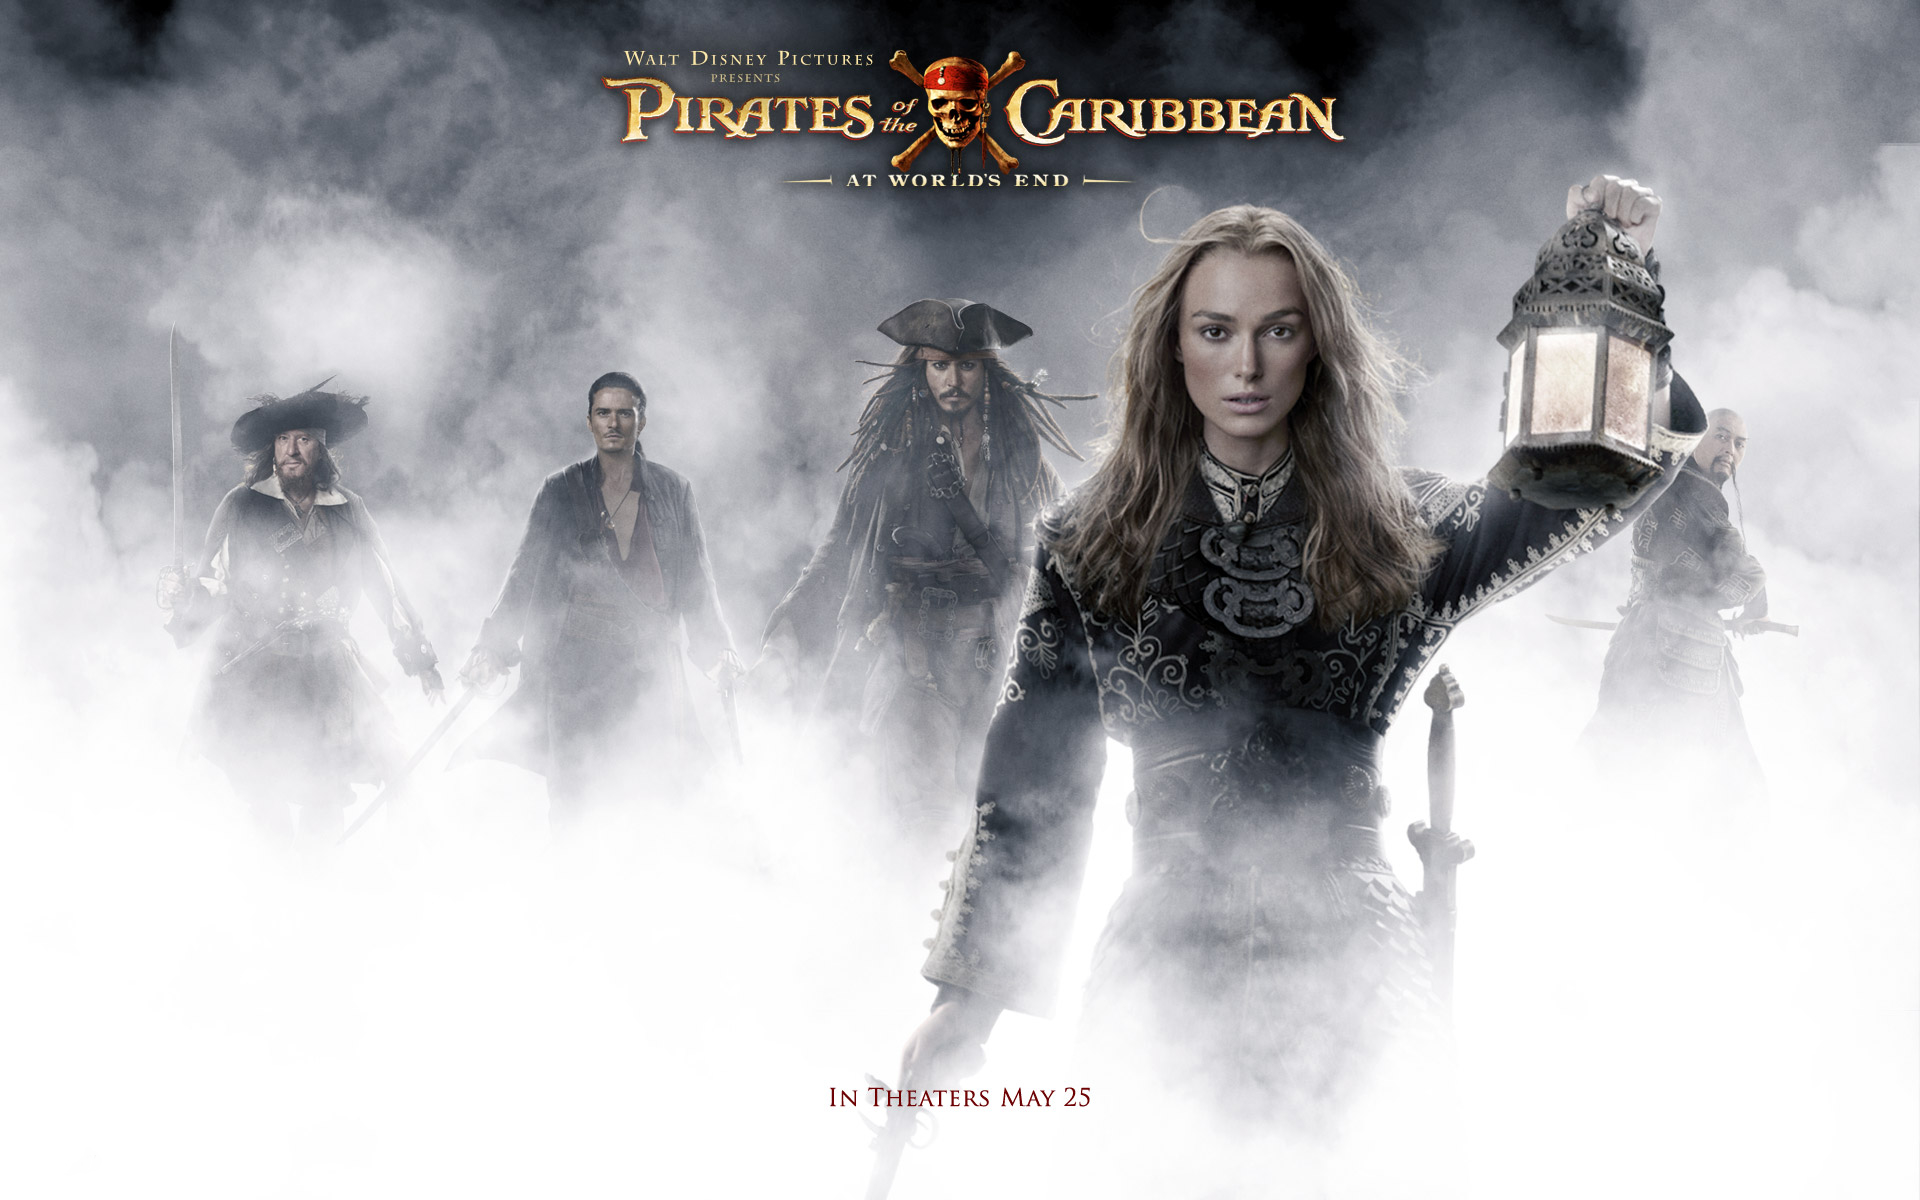 pirates of the caribbean: at world's end, movie, captain sao feng, chow yun fat, elizabeth swann, geoffrey rush, hector barbossa, jack sparrow, johnny depp, keira knightley, orlando bloom, will turner, pirates of the caribbean